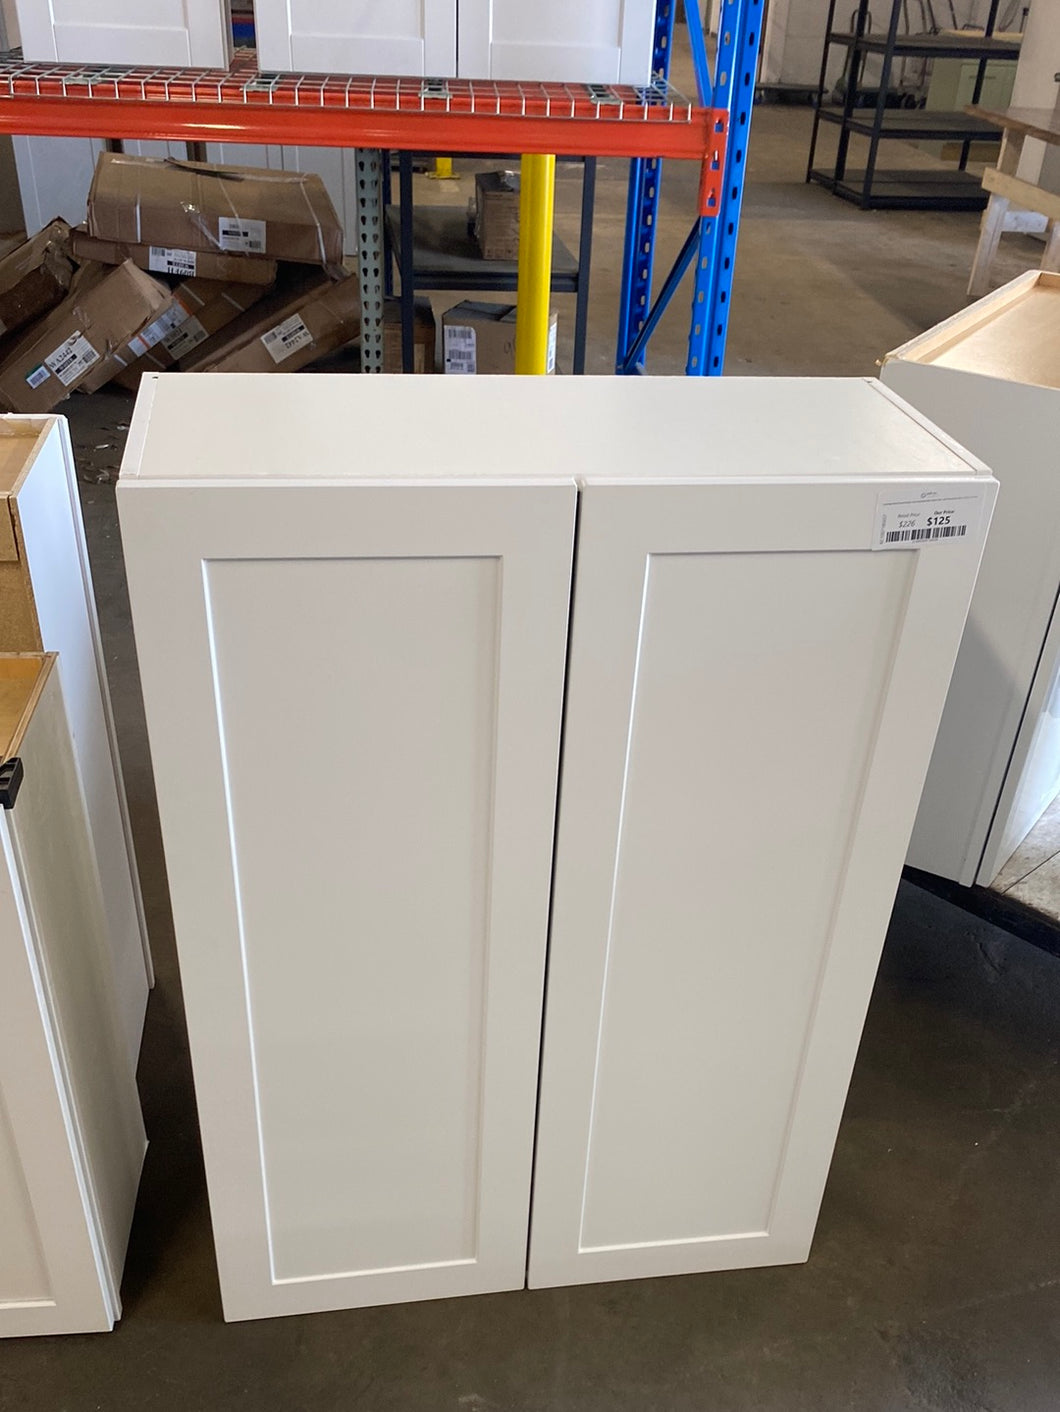 Cambridge White Plywood Shaker Stock Assembled Wall Cabinet with 2 Soft Close Doors (30 in. x 42 in. x 12.5 in.)